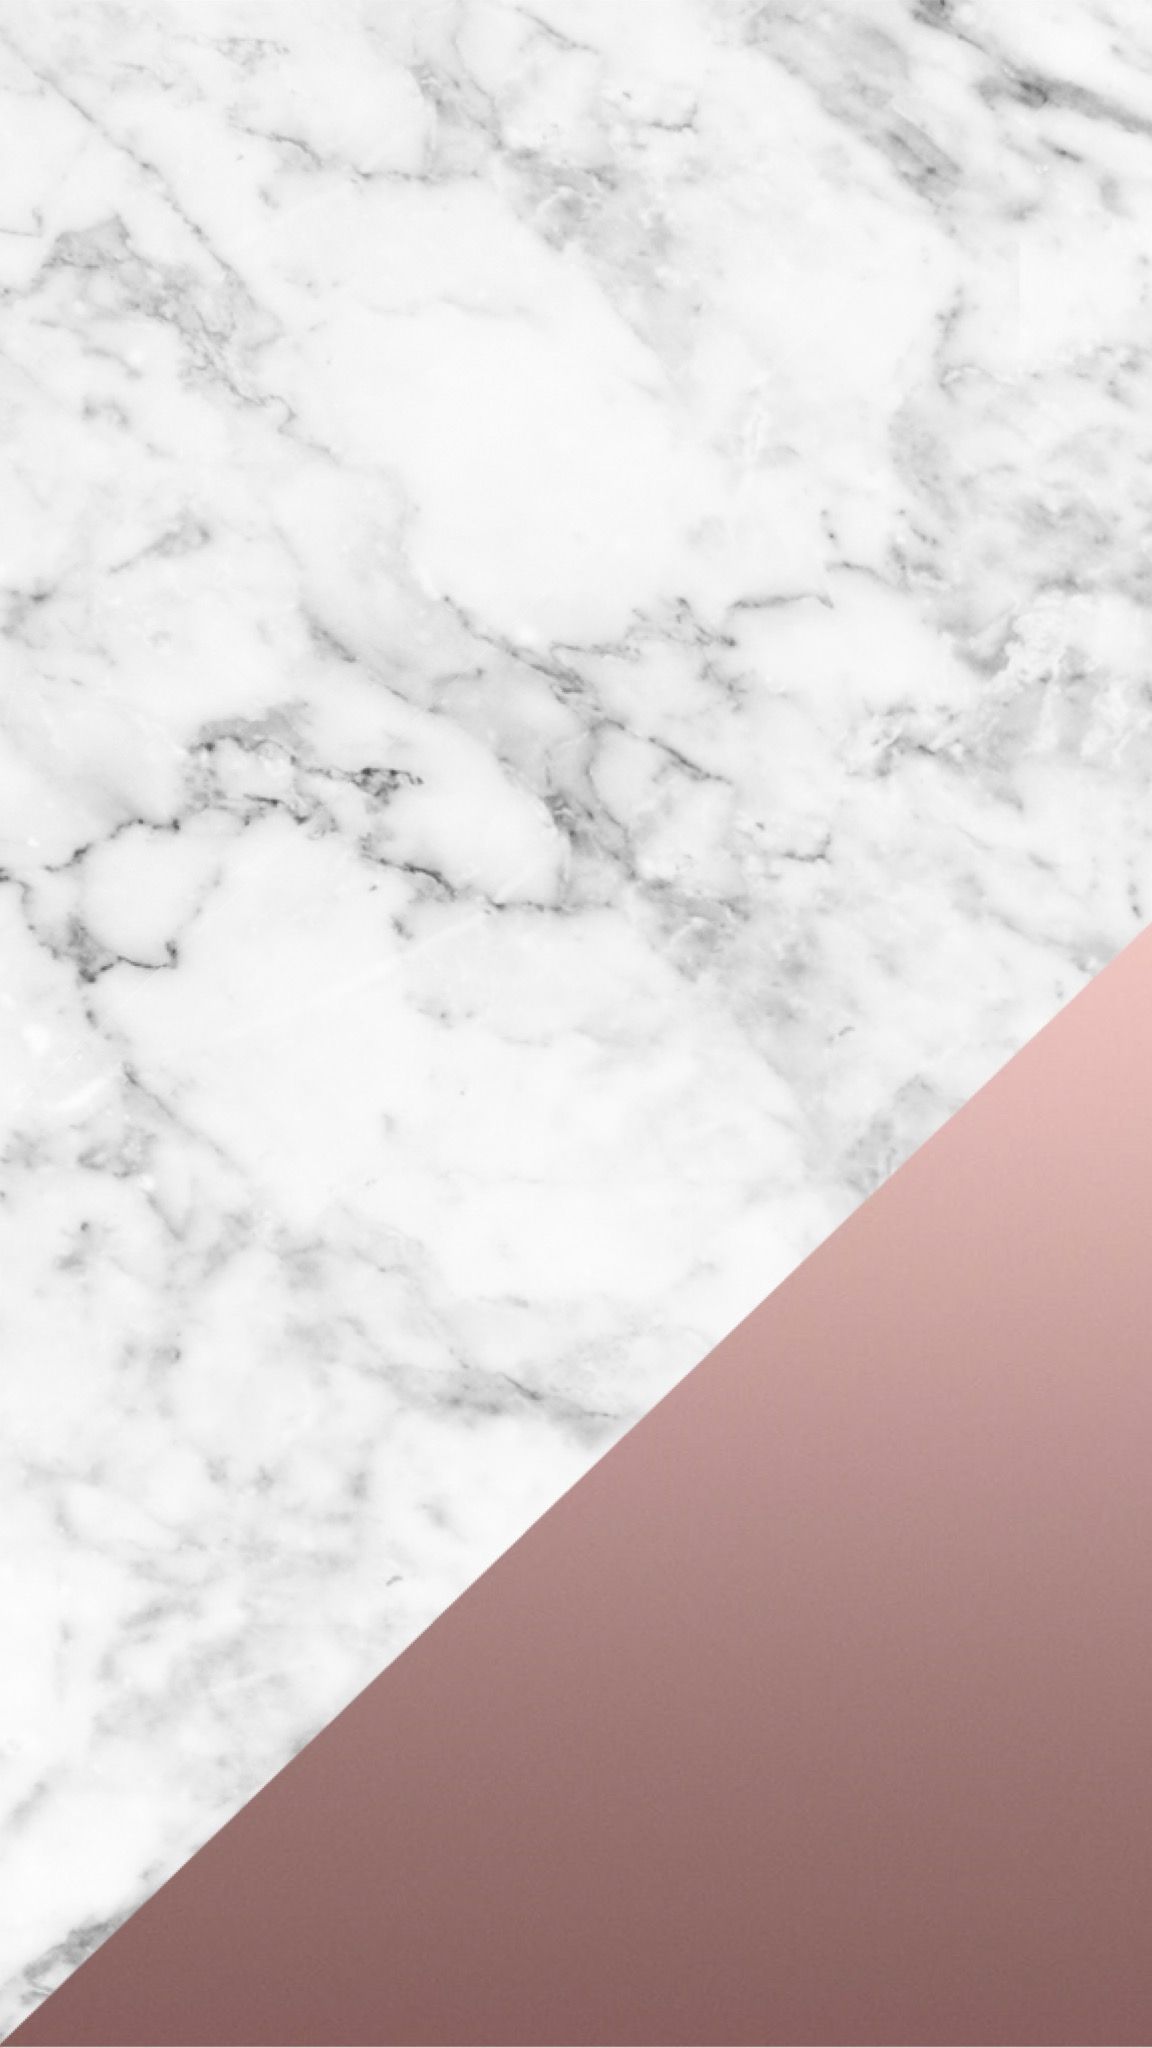 Rose gold marble wallpaper. Marble wallpaper phone, Marble iphone